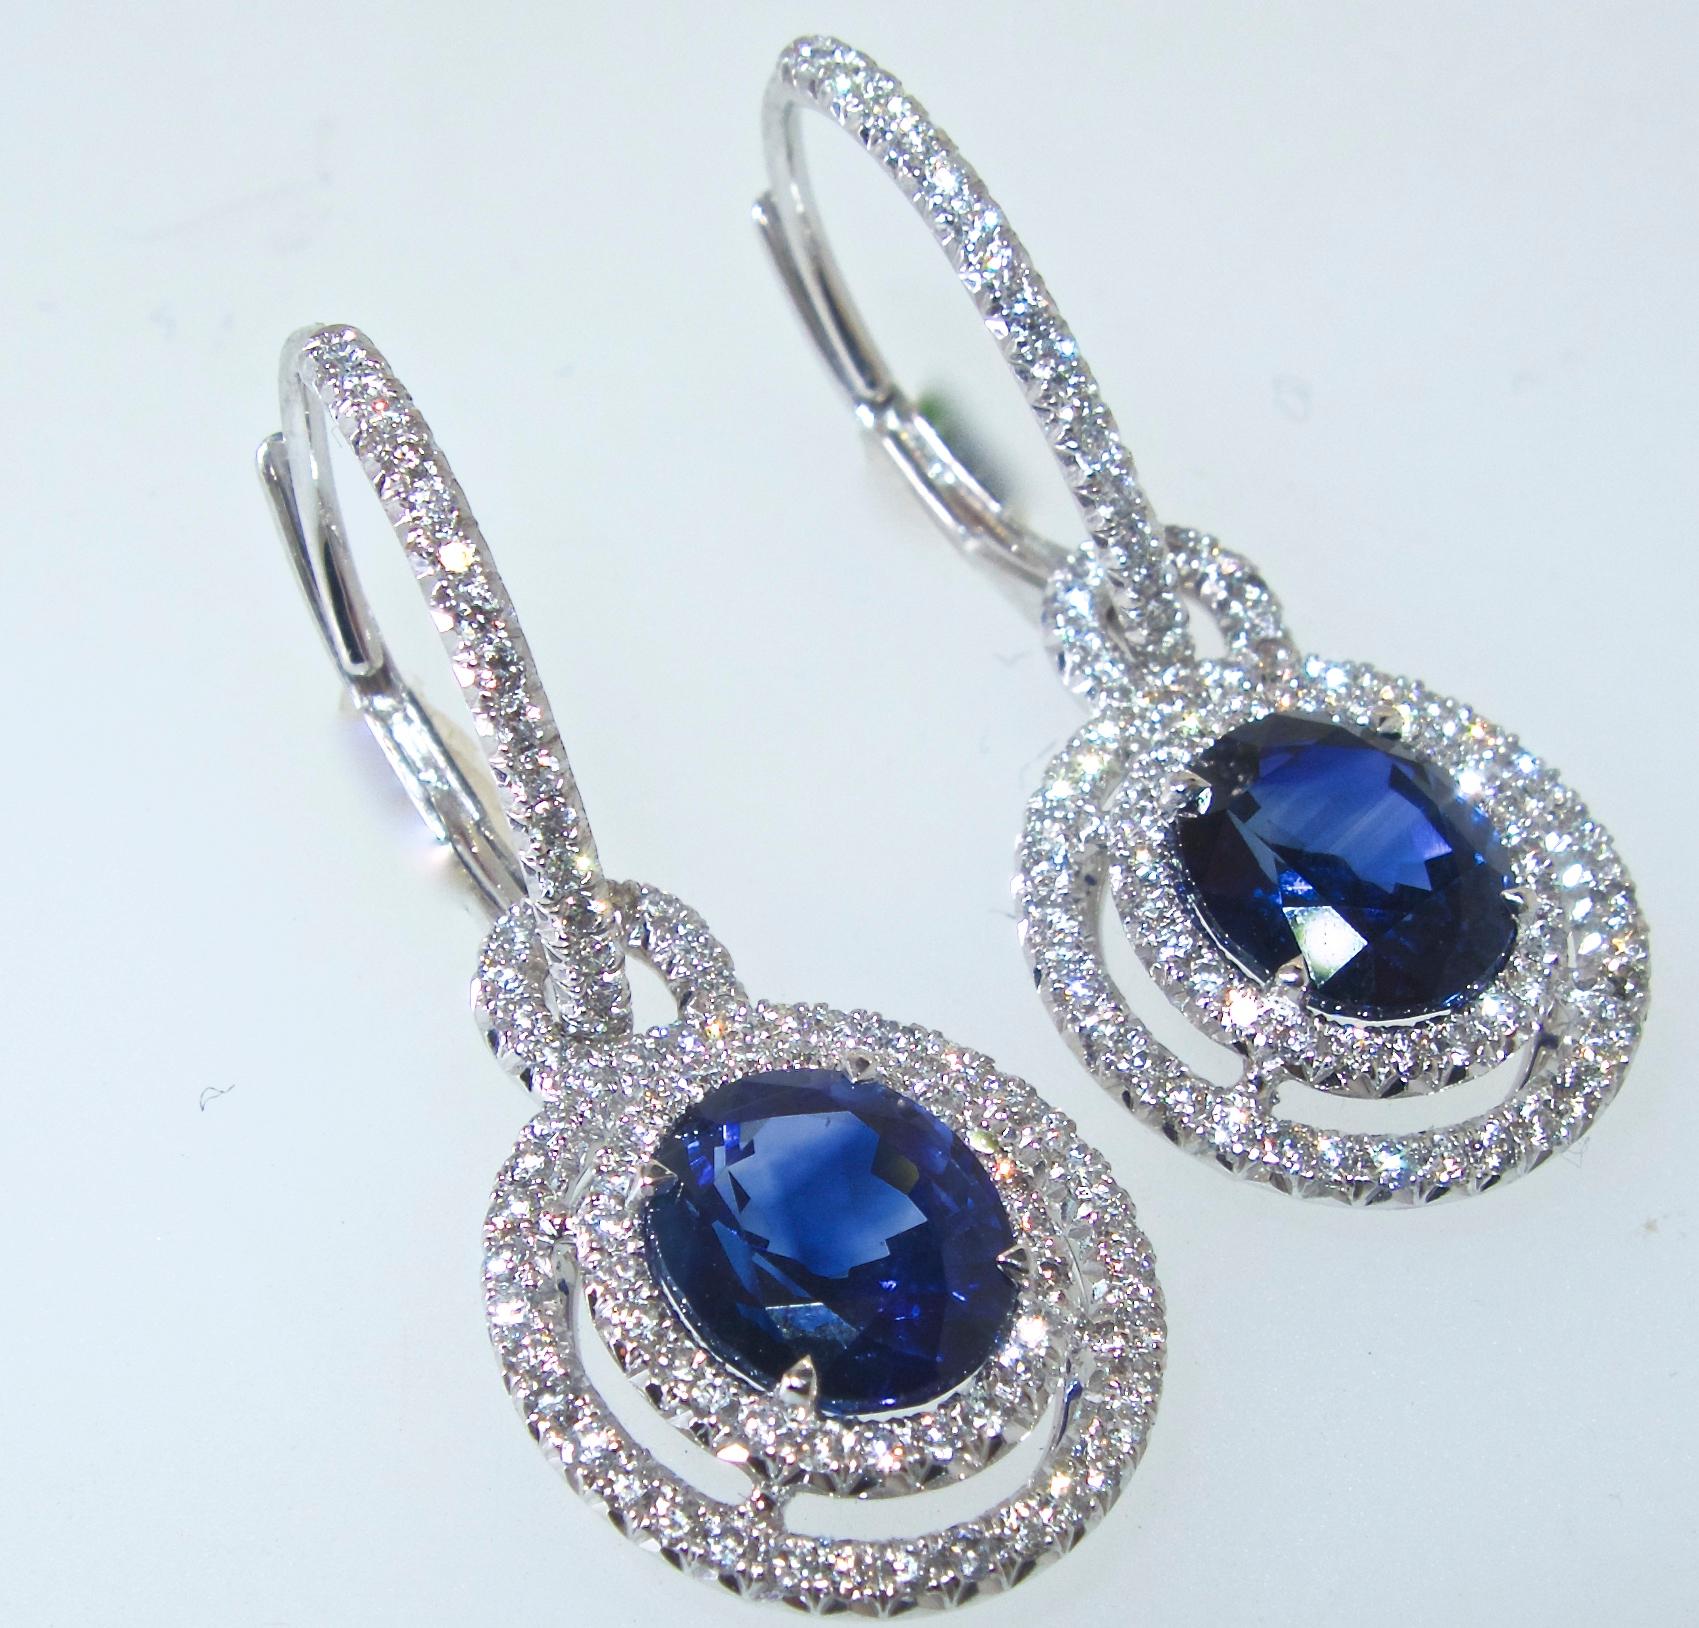 Sapphire and diamond earrings.  The natural vivid blue oval sapphires, are very fine quality, finely matched, with cutting as evident of their proportions, and the brightness of the stones.  The sapphires weigh 3.89 totally.  They are accented by